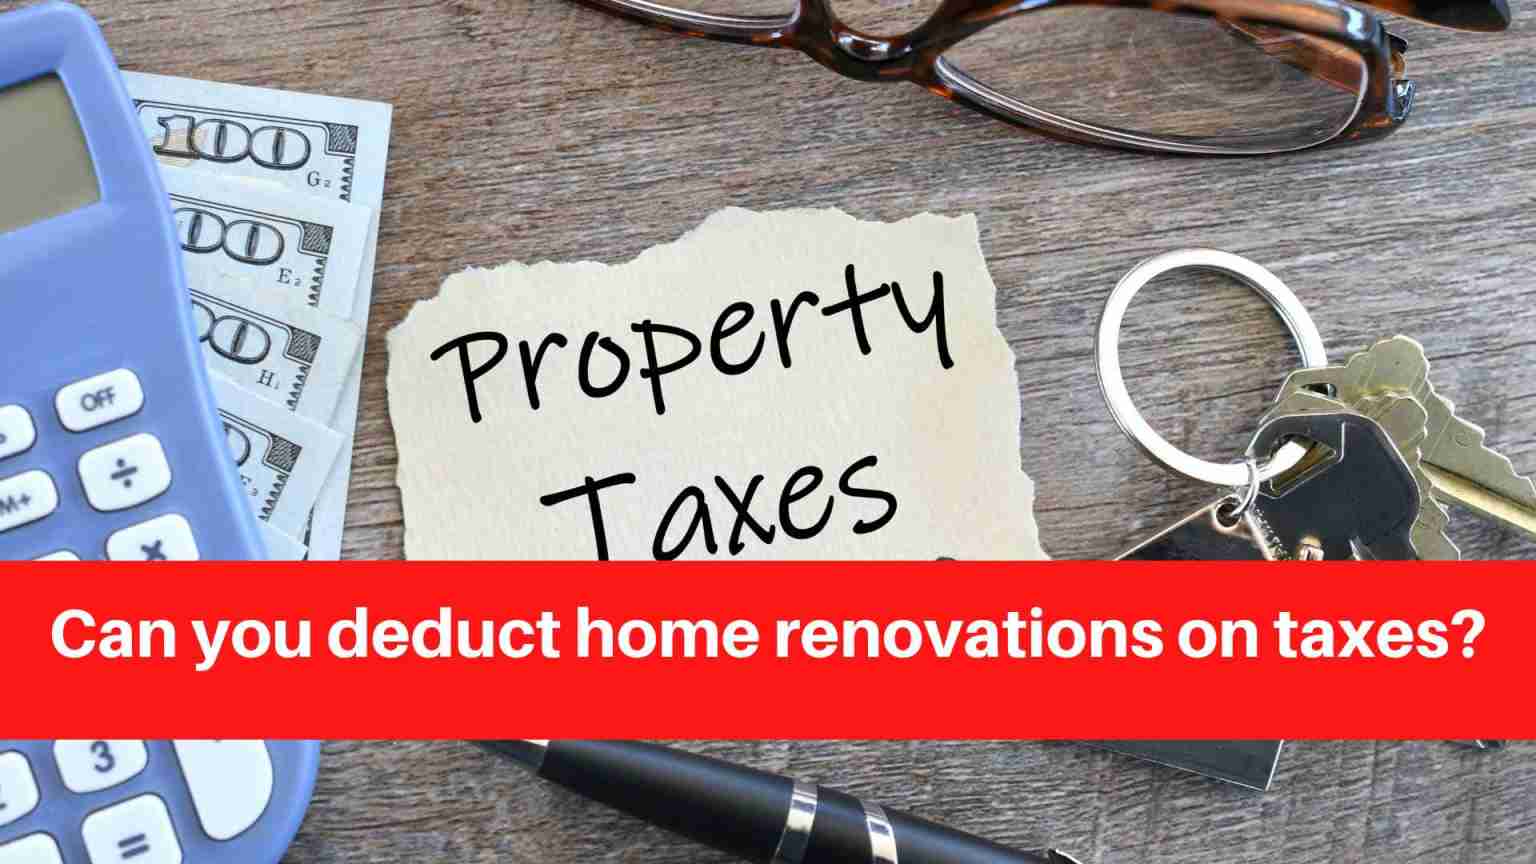 Can you deduct home renovations on taxes